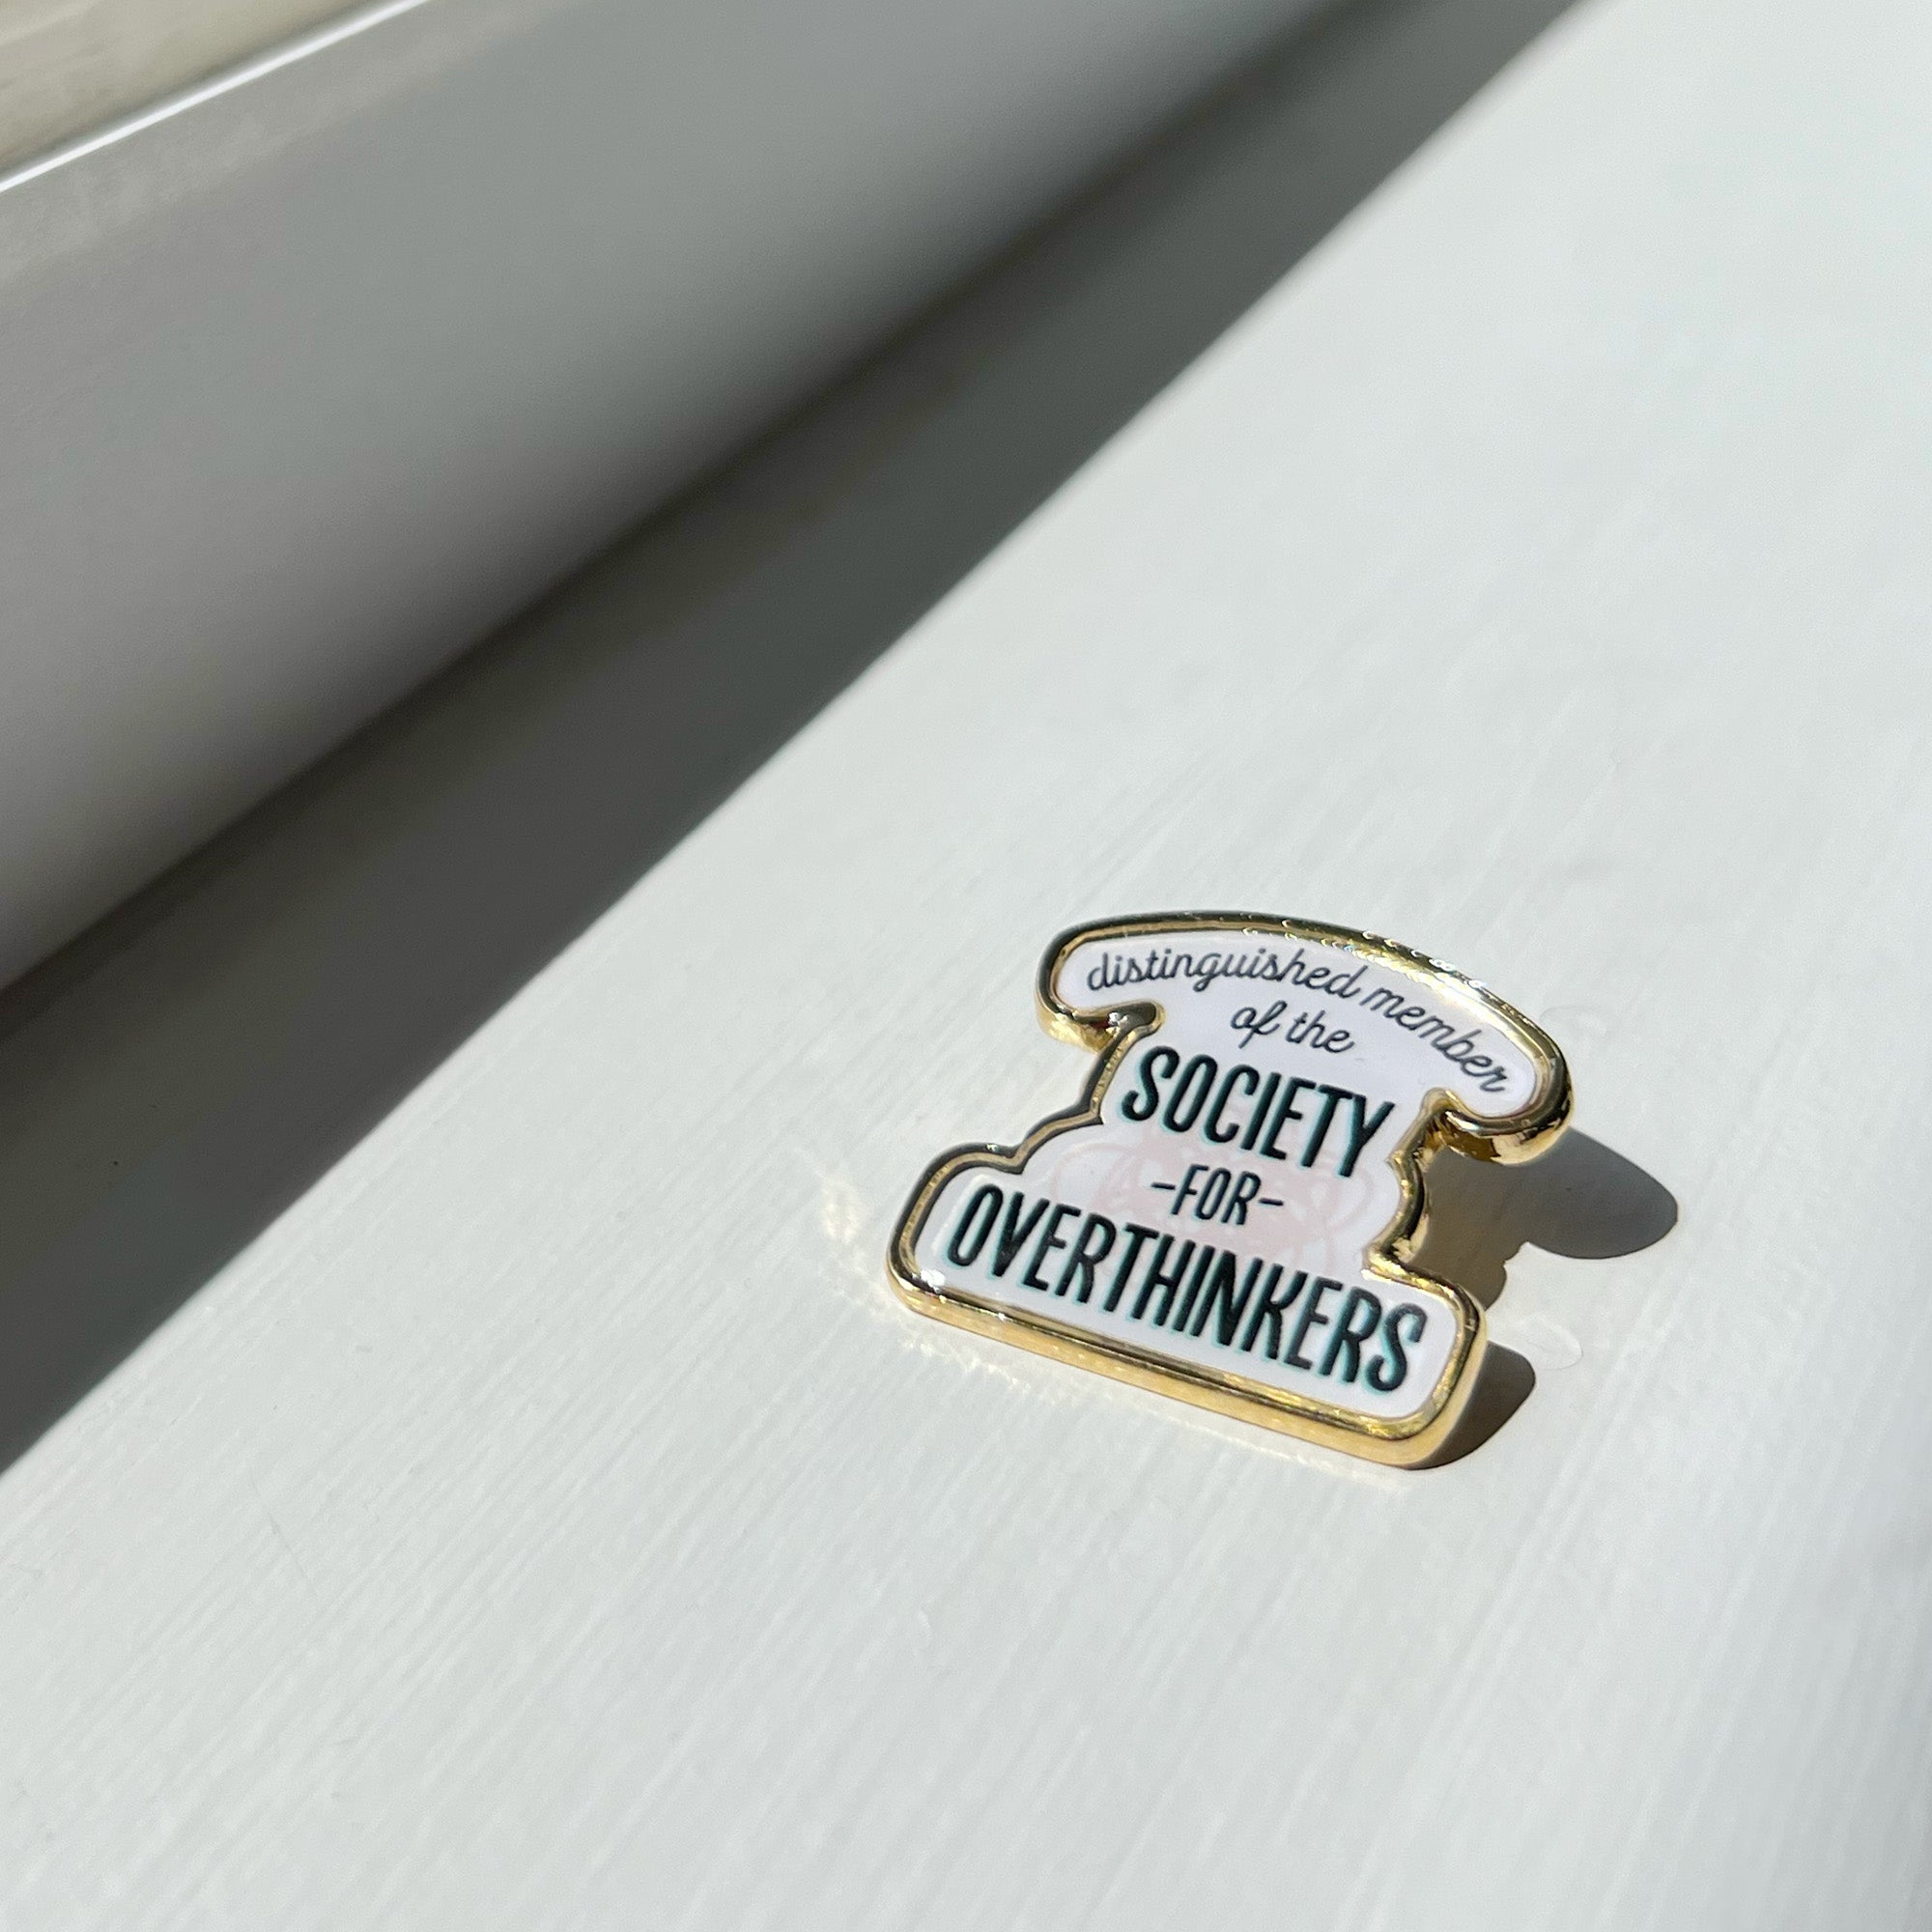 Society for overthinkers lapel pin by I&